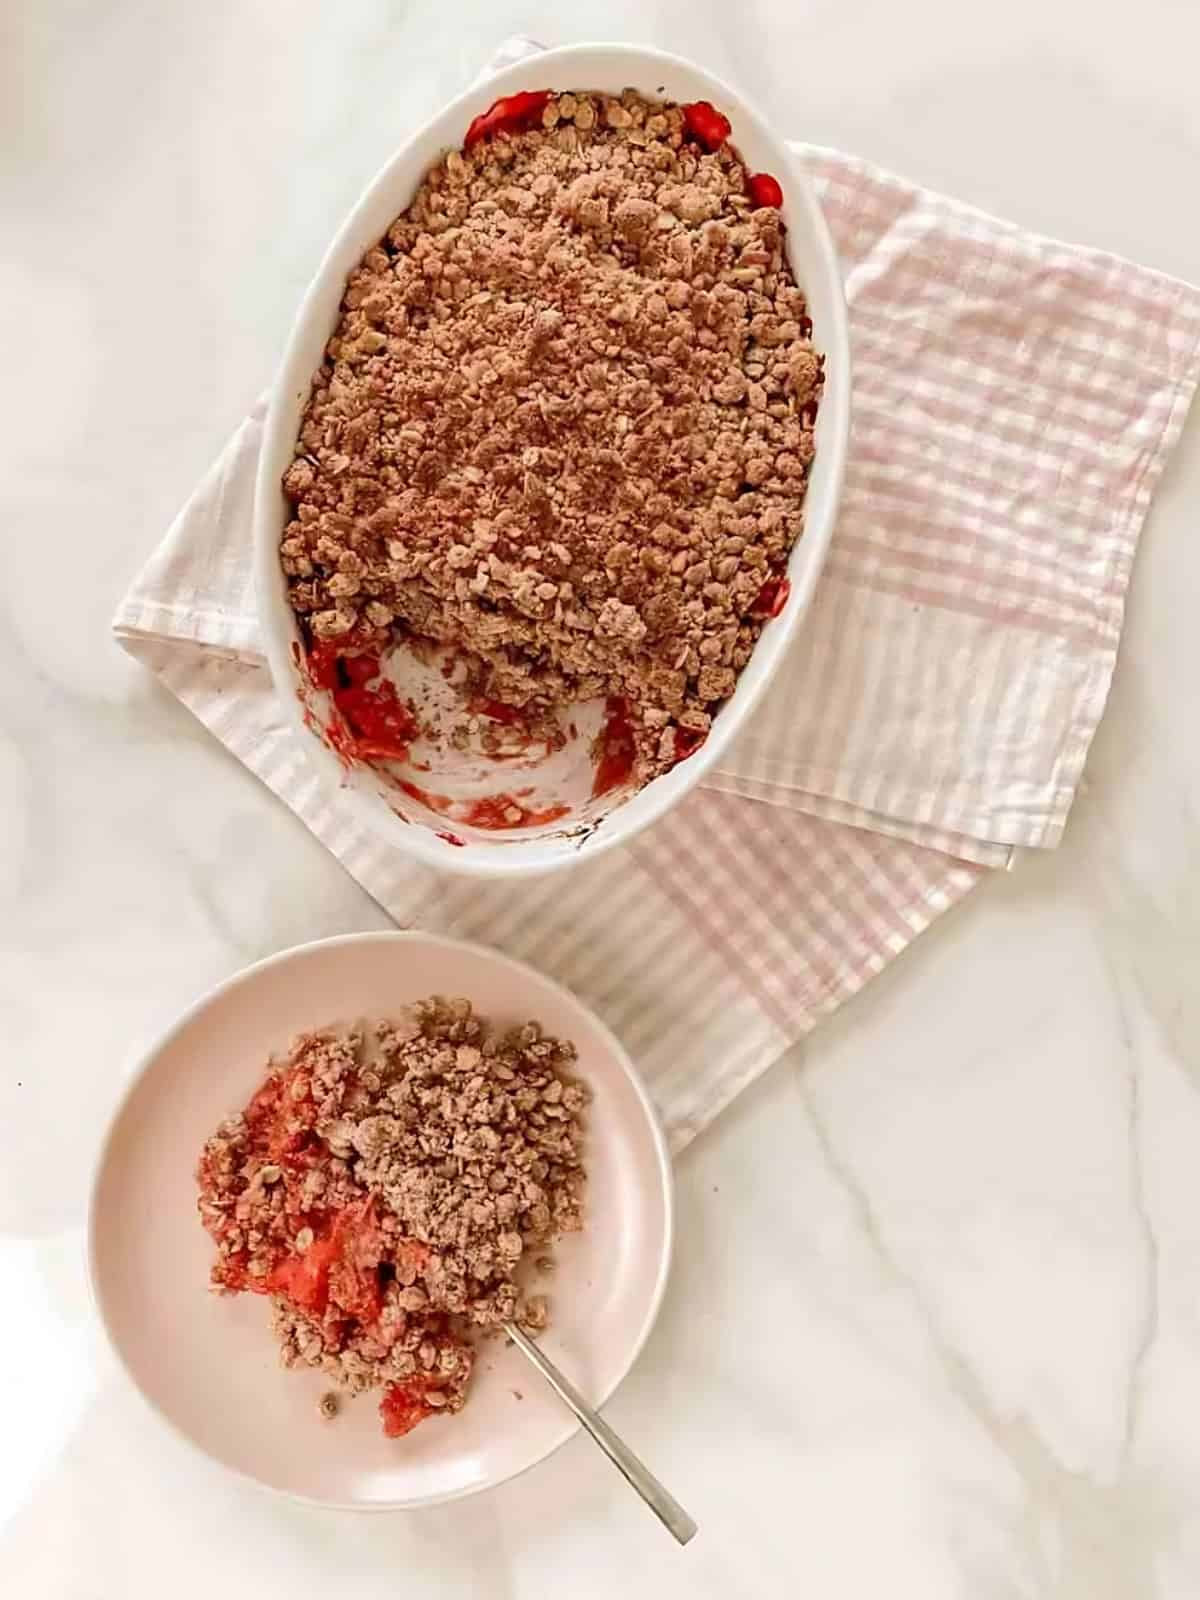 Rhubarb Crumble platter with a serving of crumble on a plate.